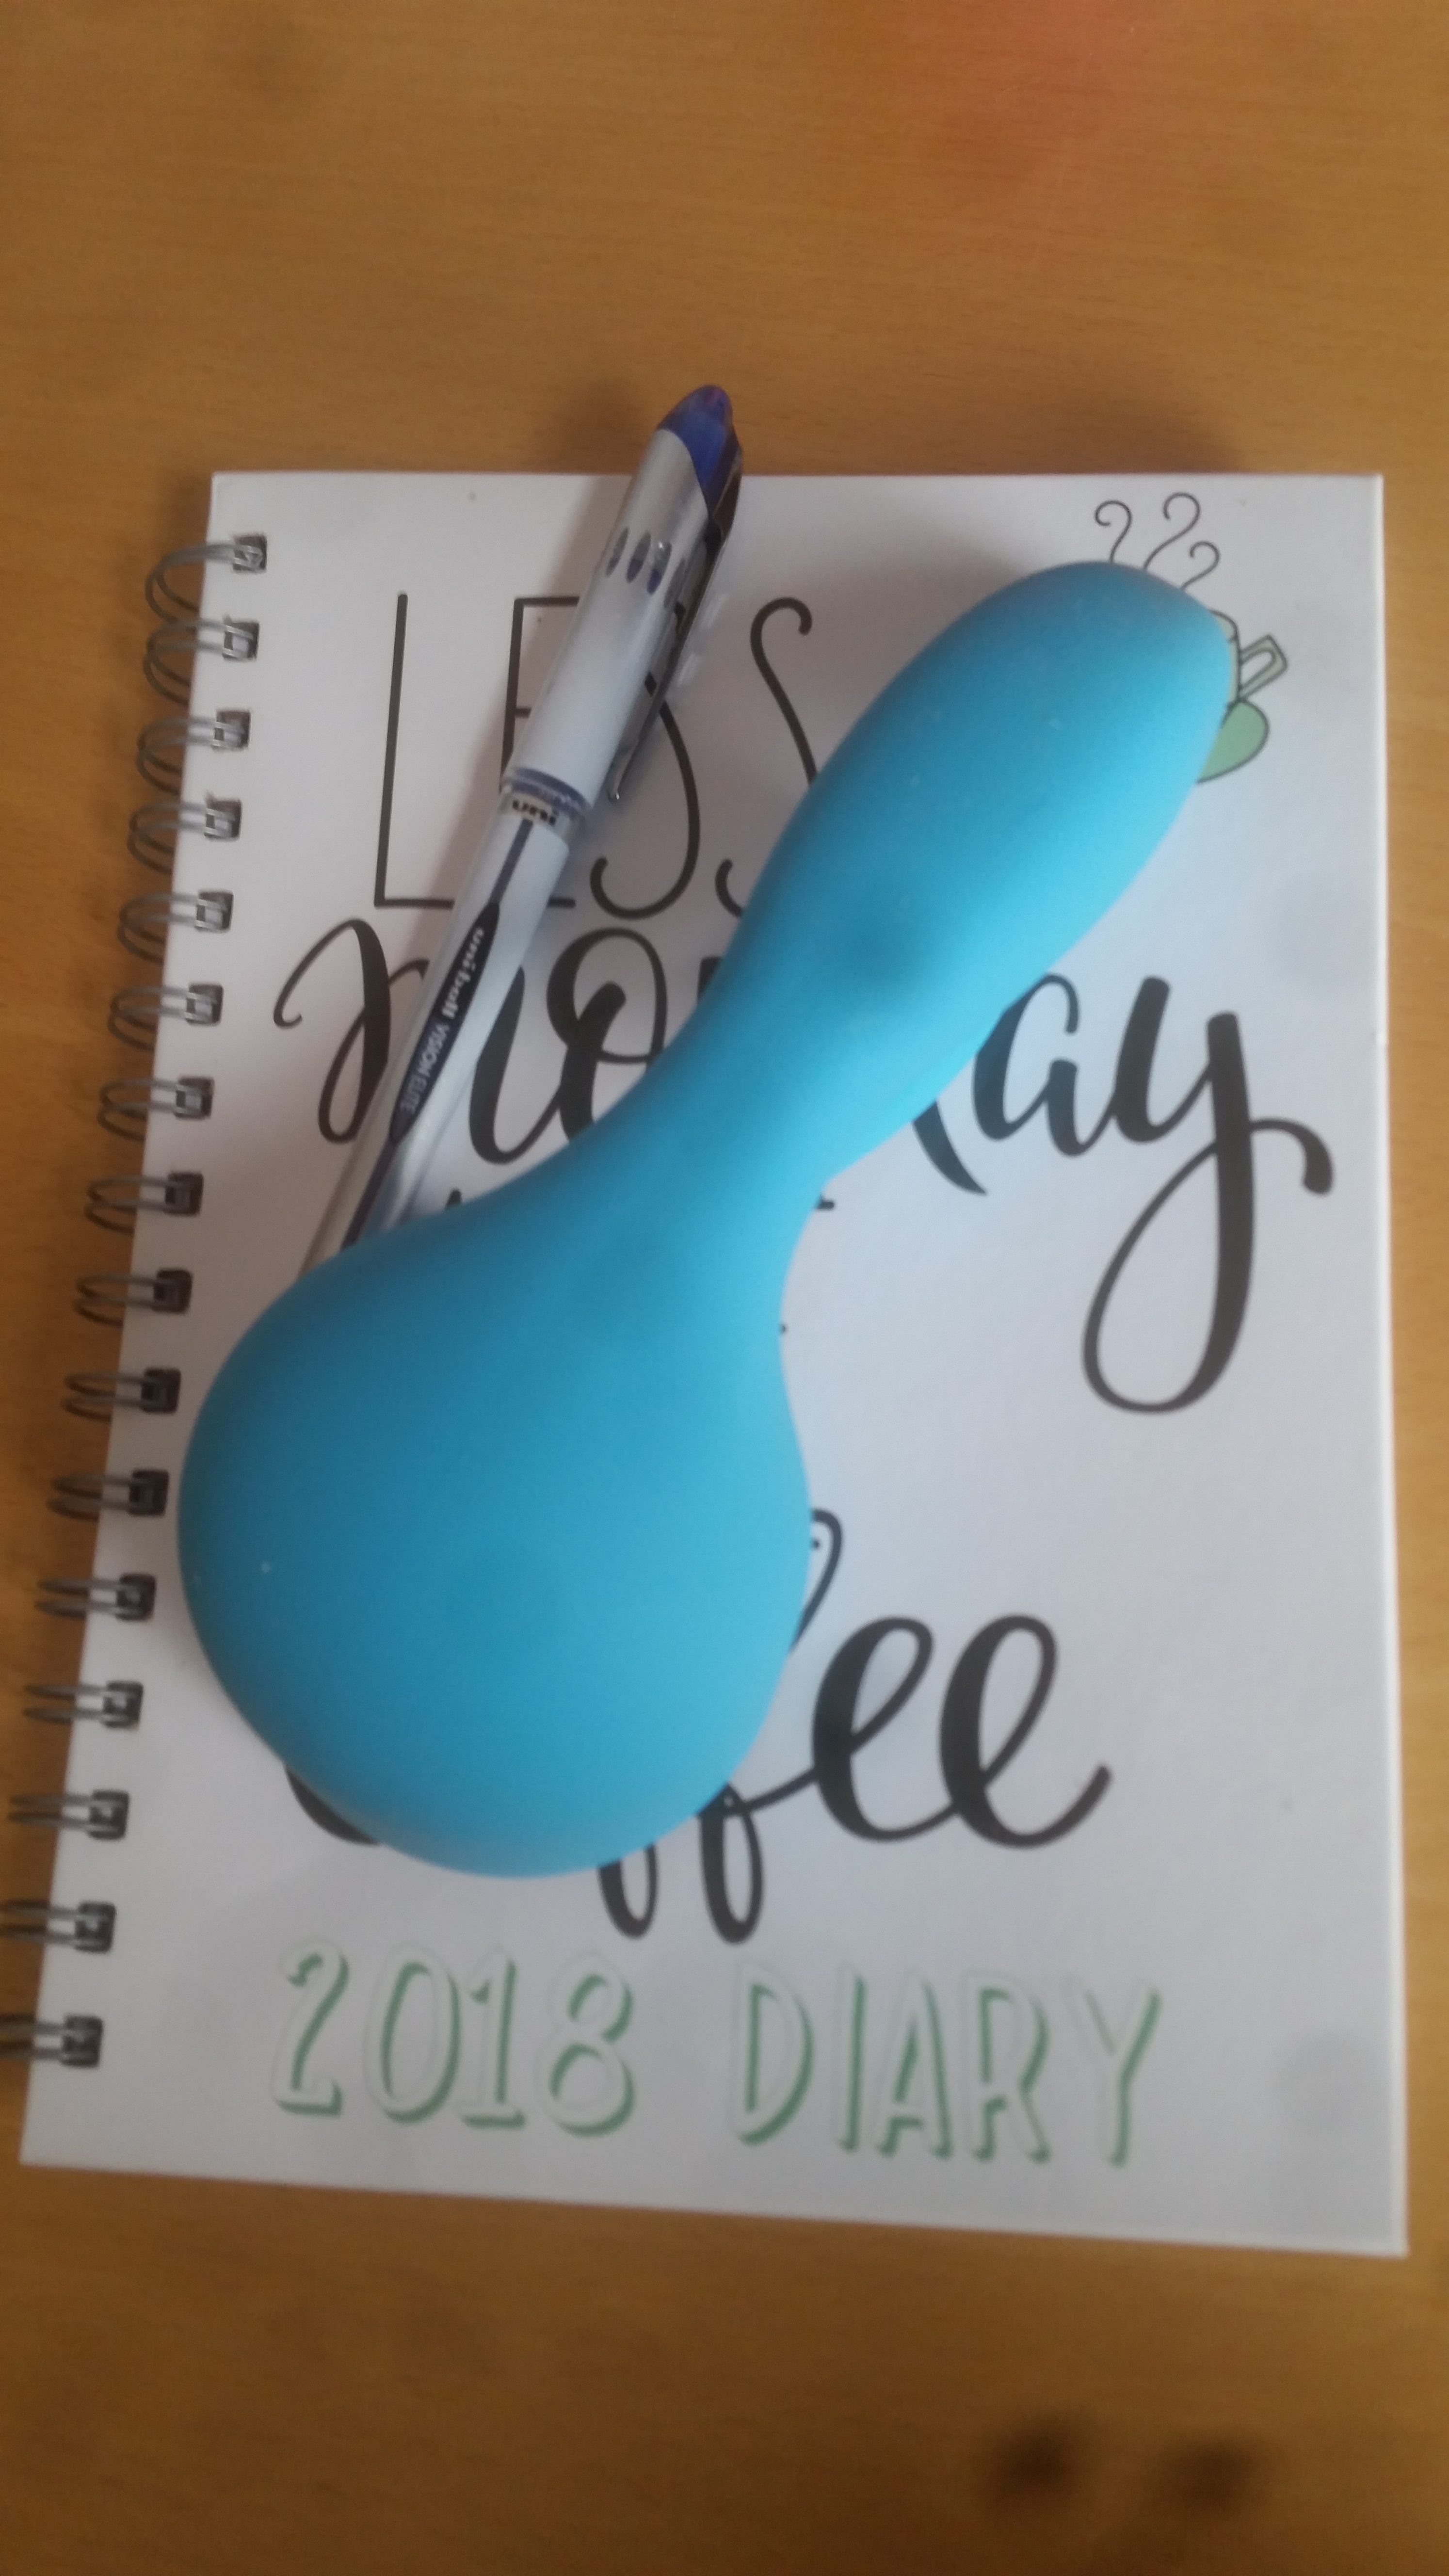 The bodywand rabbit wand attachment made of blue silicone sitting on top of a diary and pen on my desk.